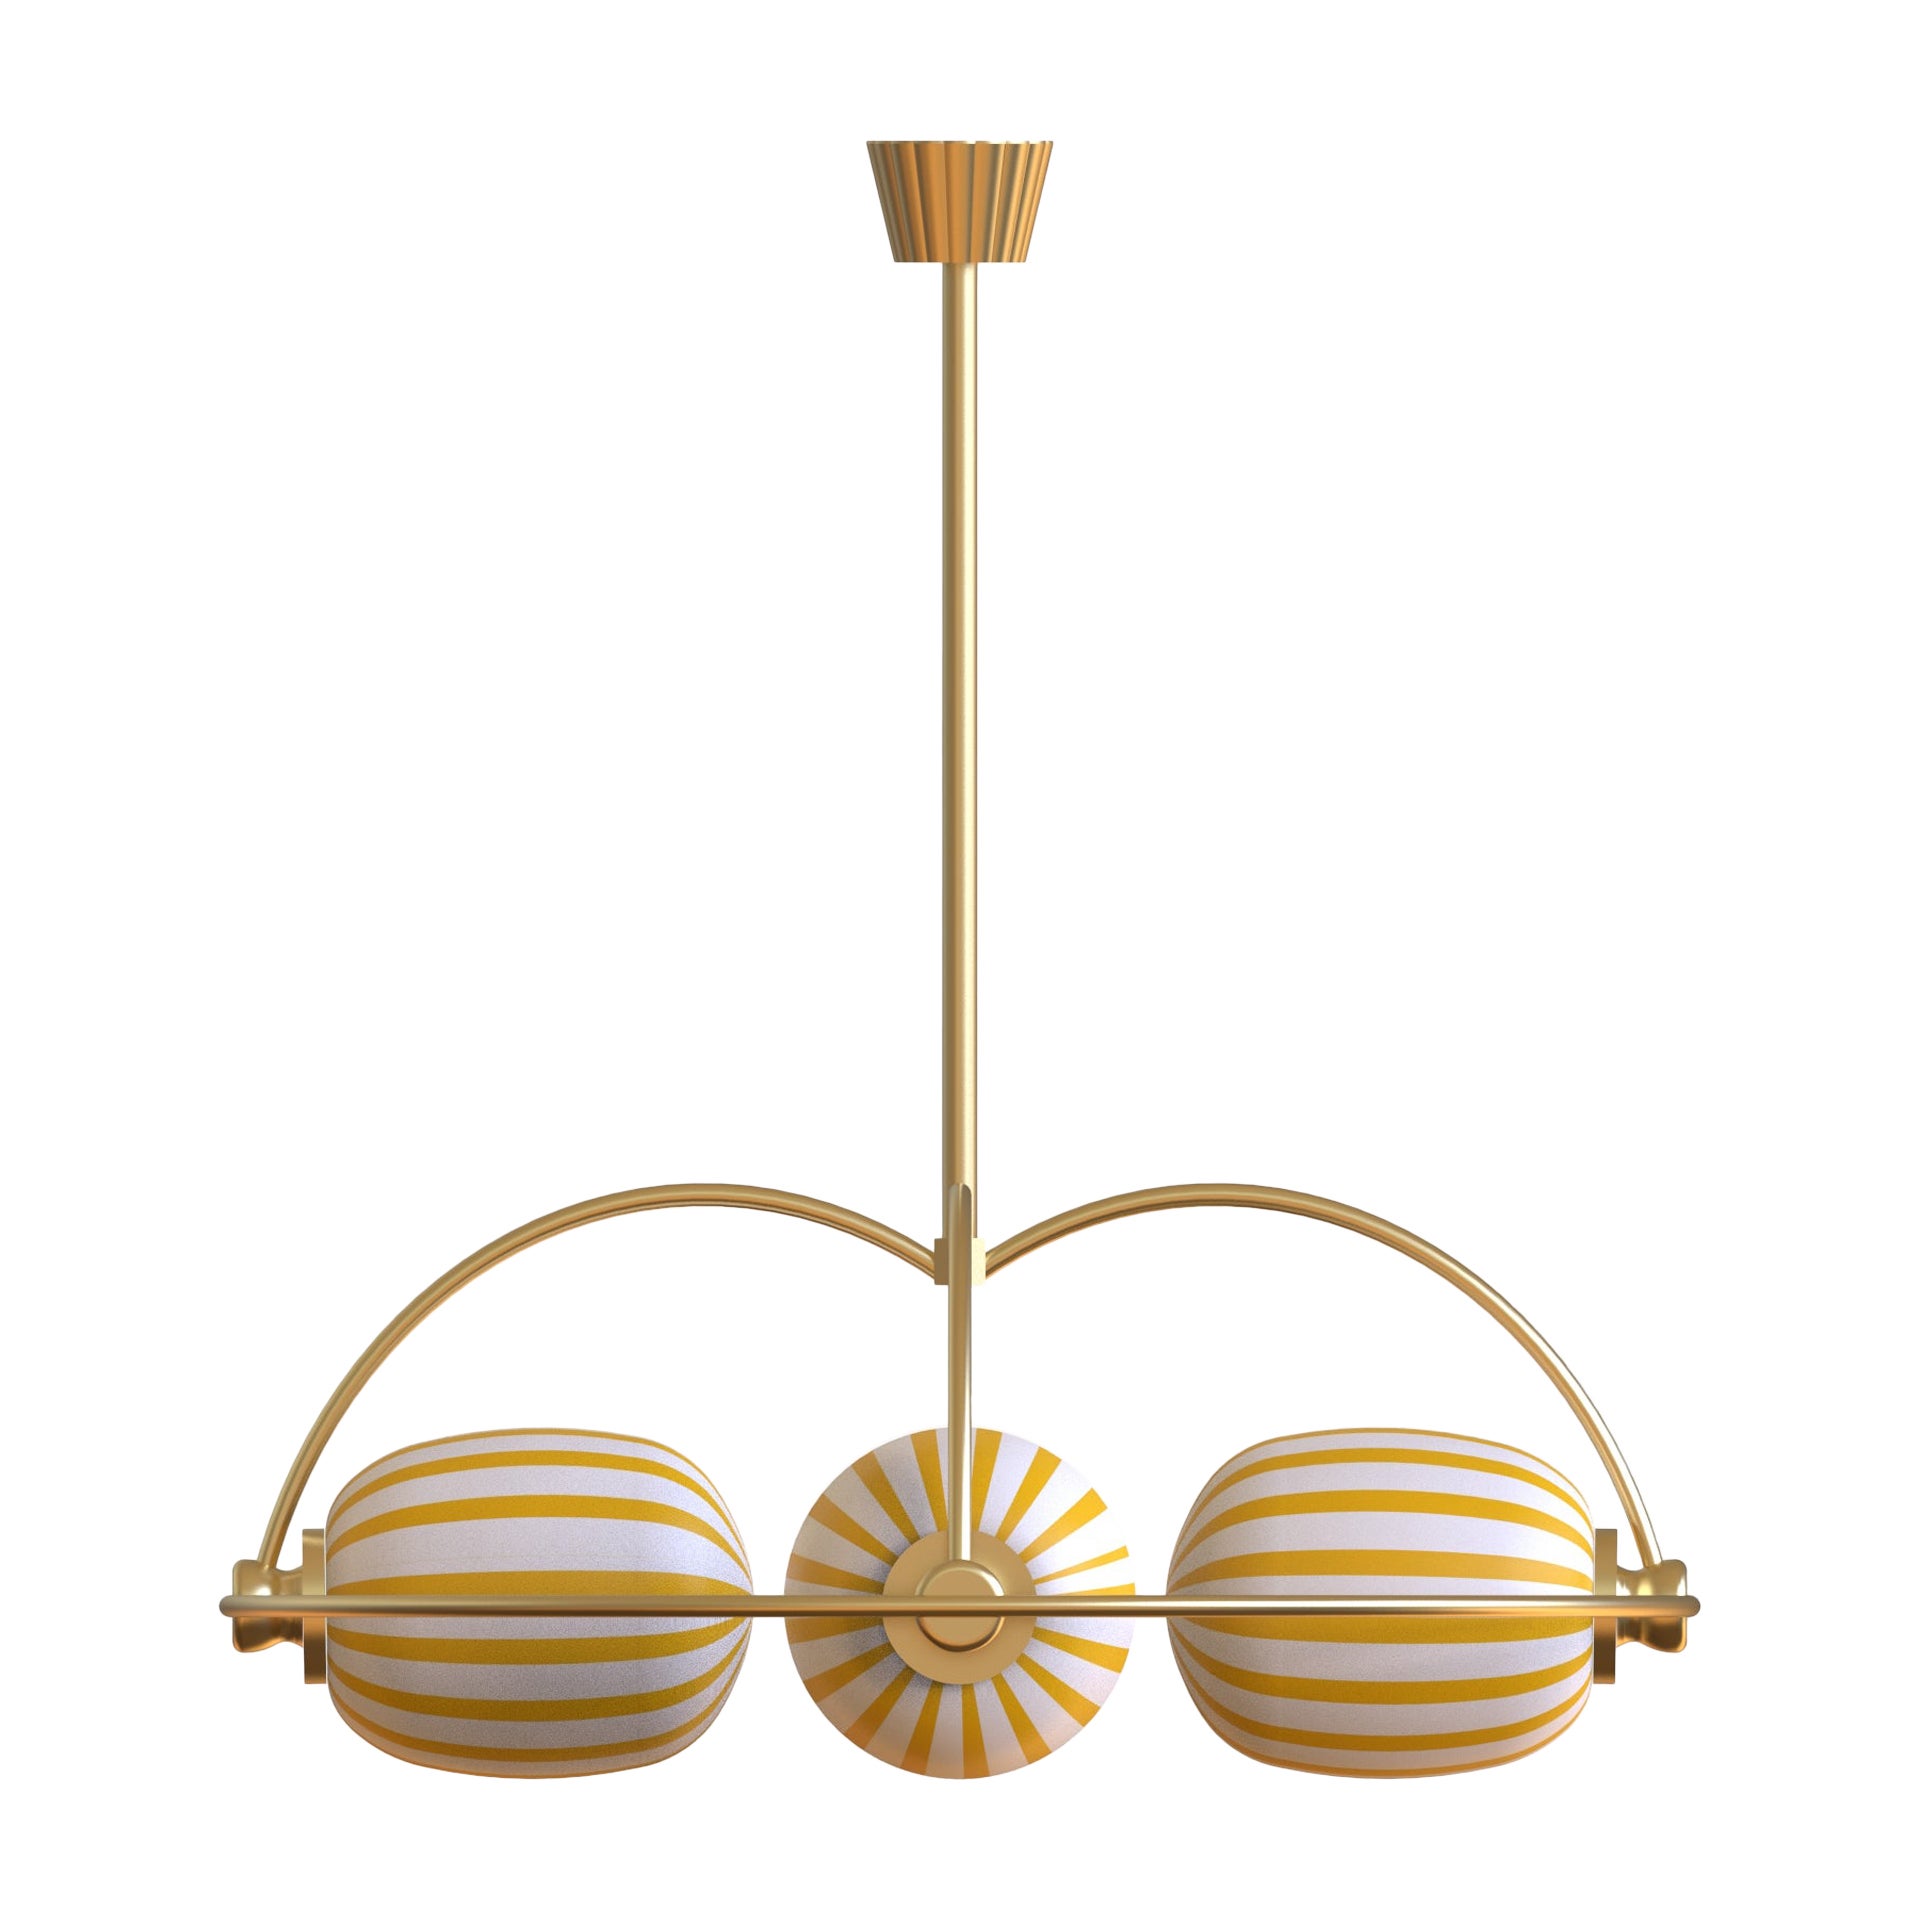 4 Module Yellow and White Bullseye Chandelier with Brass and Handblown Glass